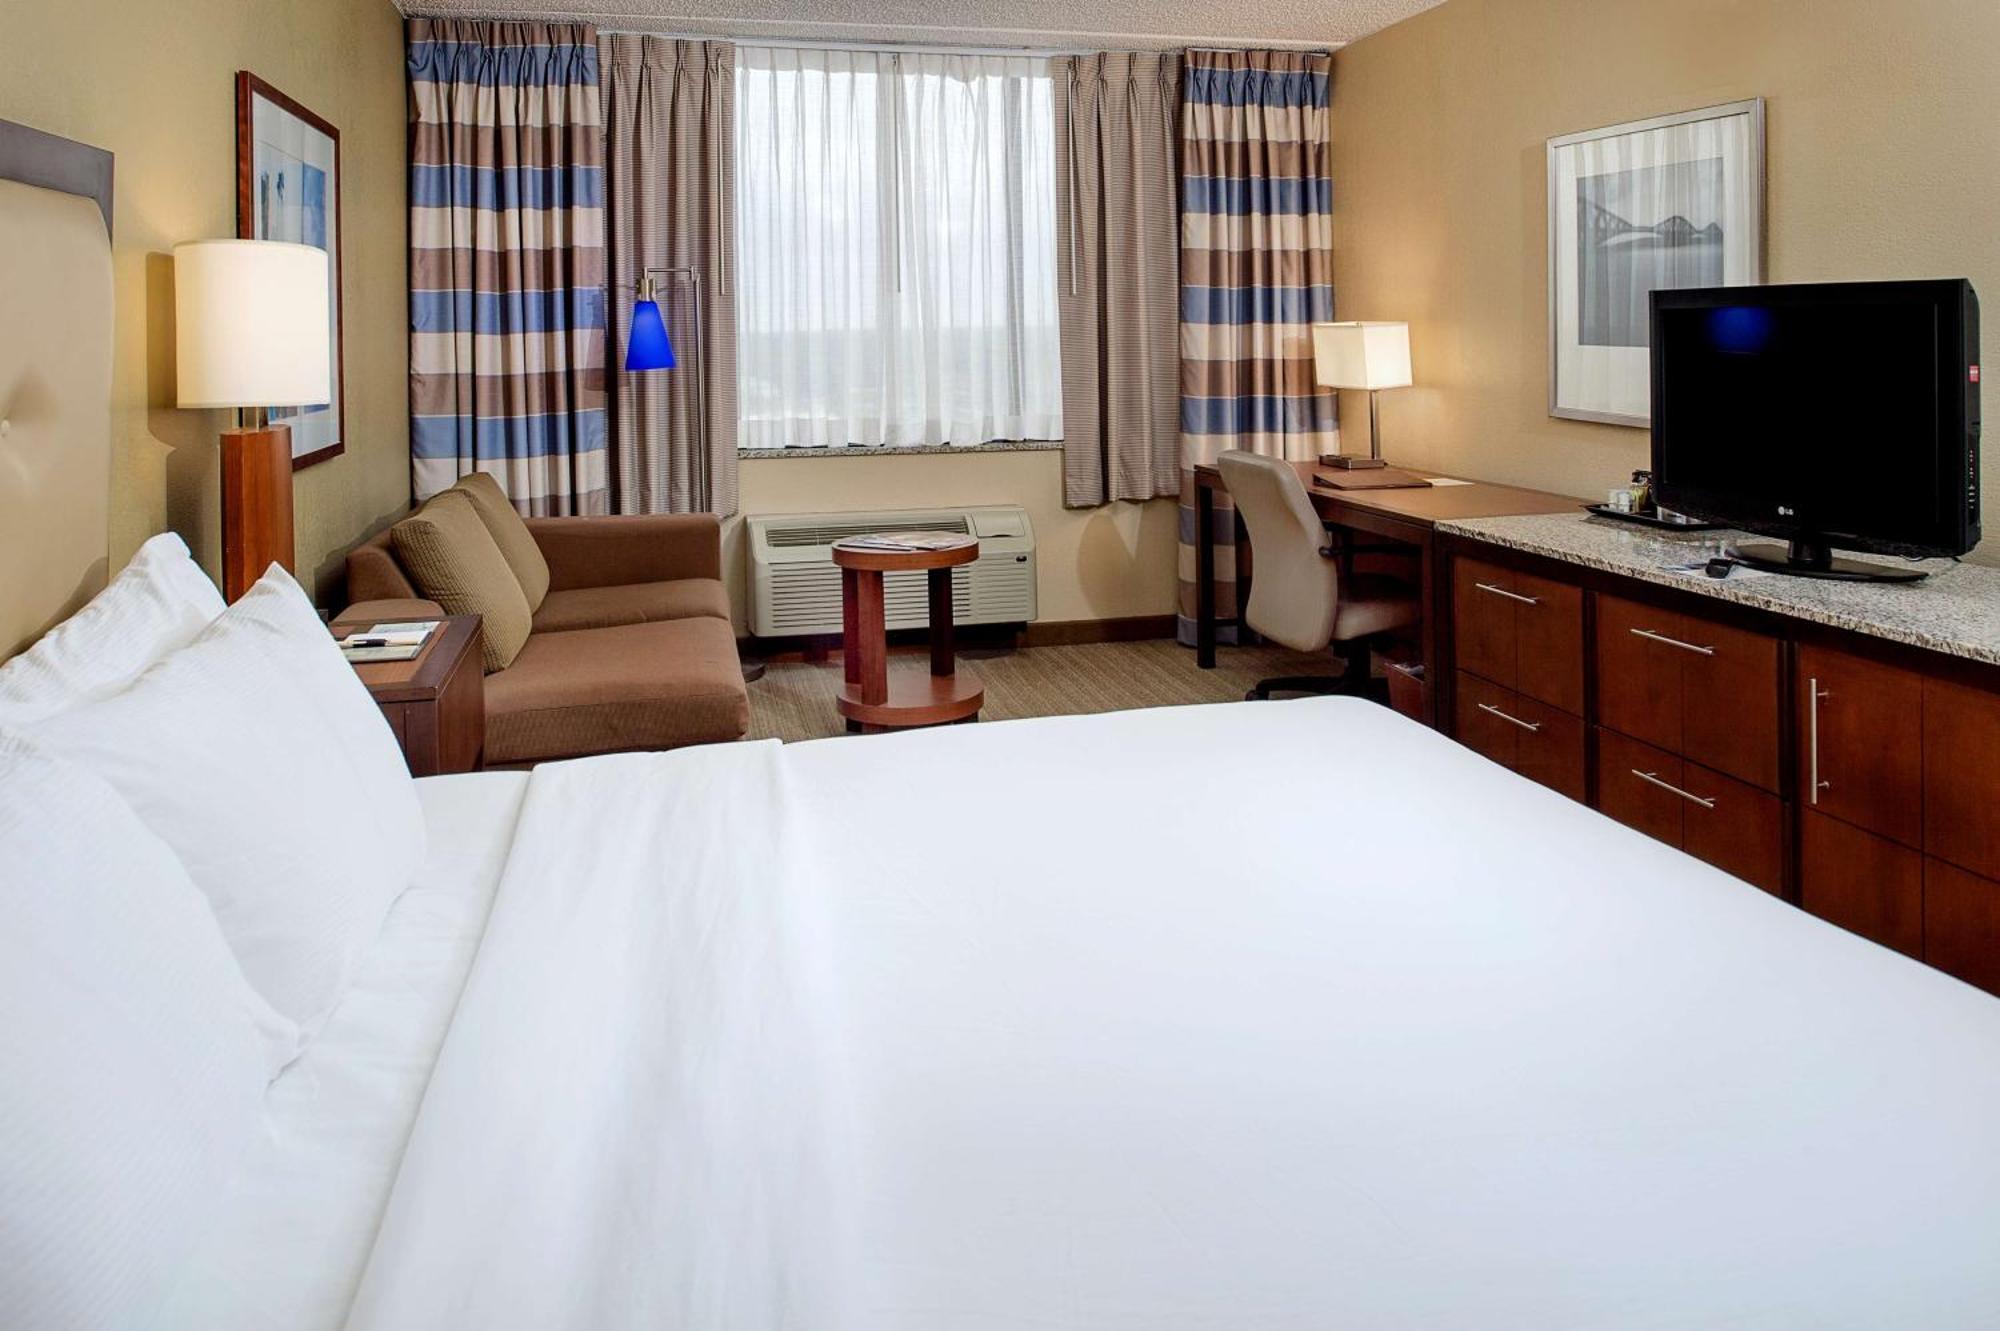 Doubletree By Hilton St. Louis At Westport Hotel Maryland Heights Ngoại thất bức ảnh